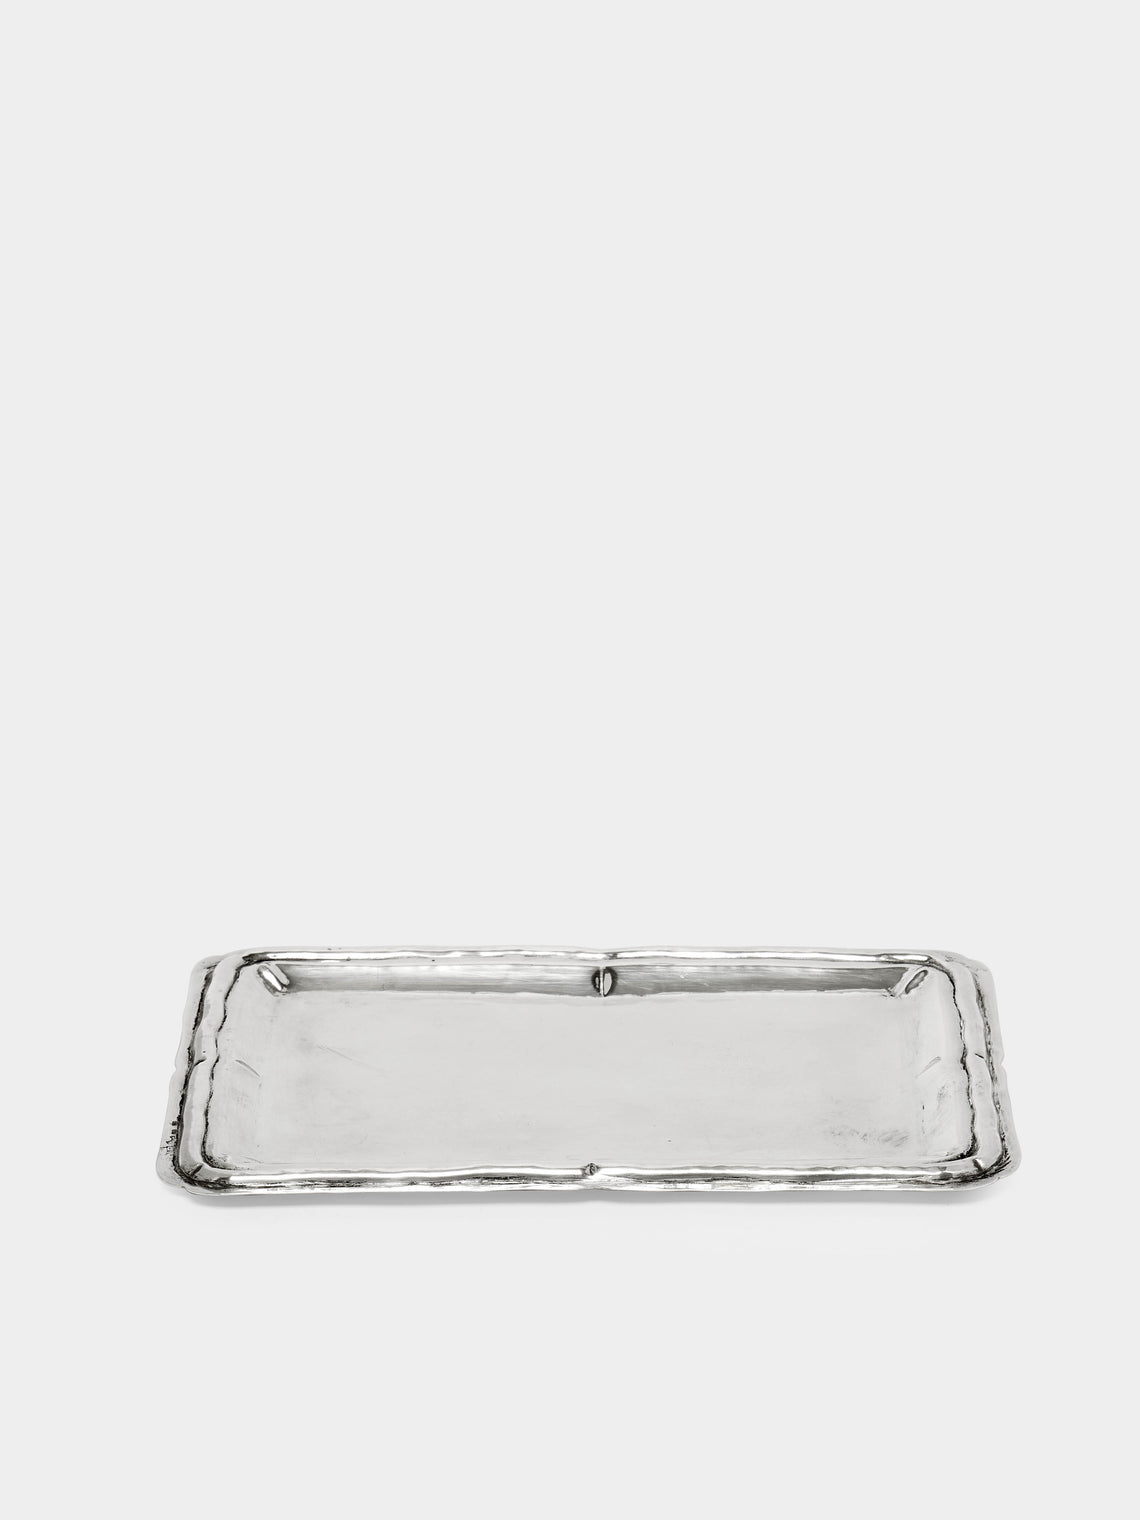 Antique and Vintage - 1900s Solid Silver Tray -  - ABASK